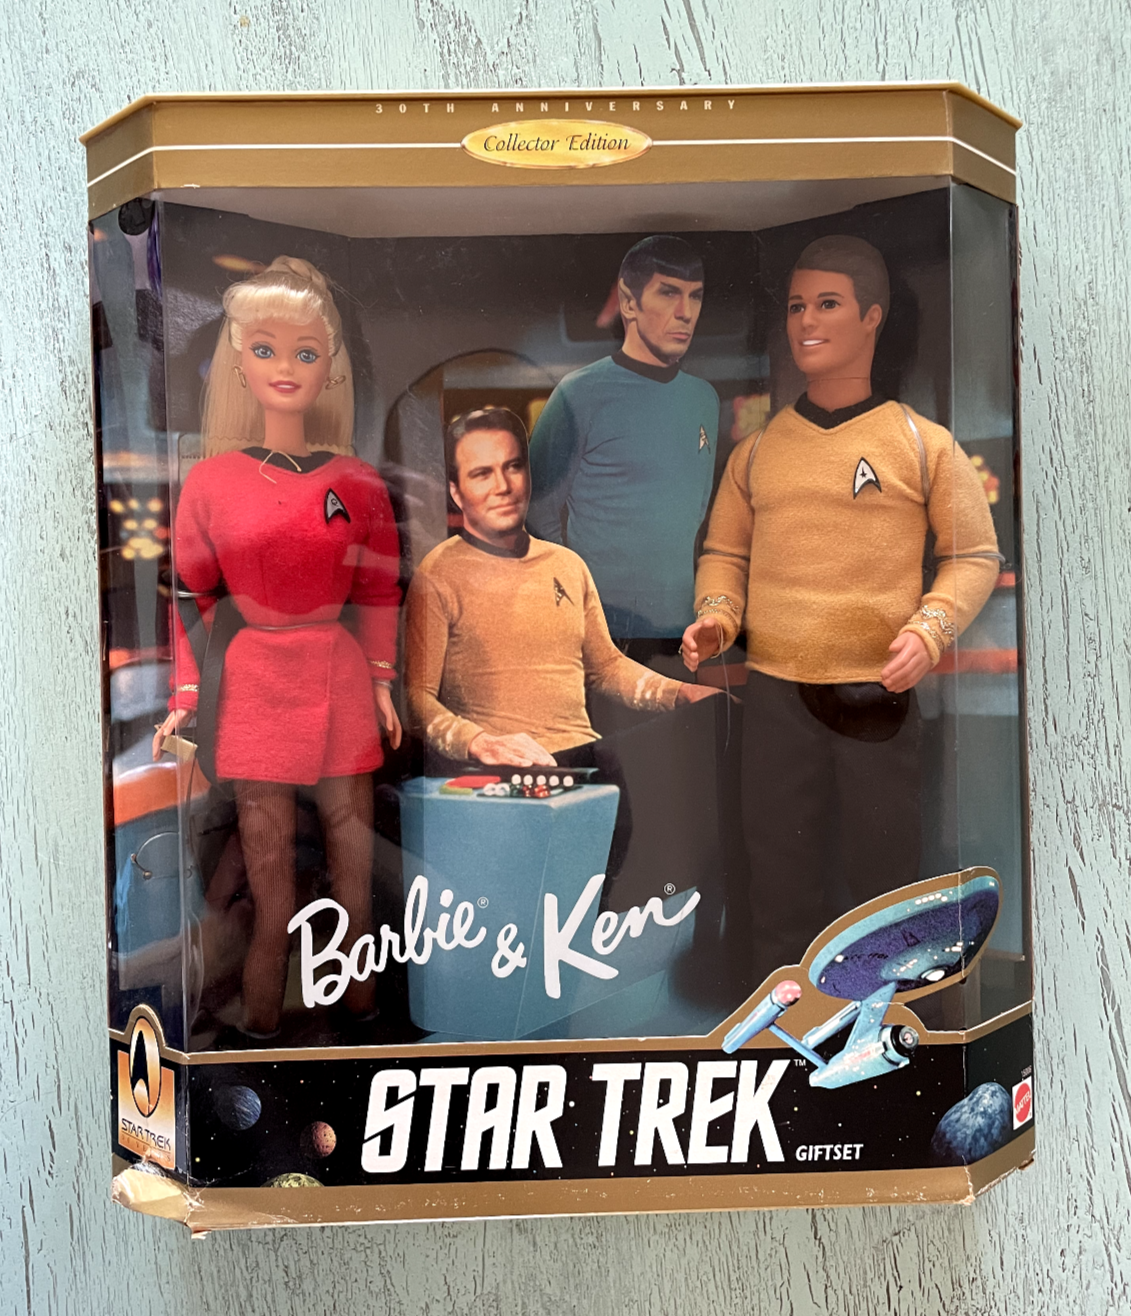 barbie in the box with cardboard characters from star trek